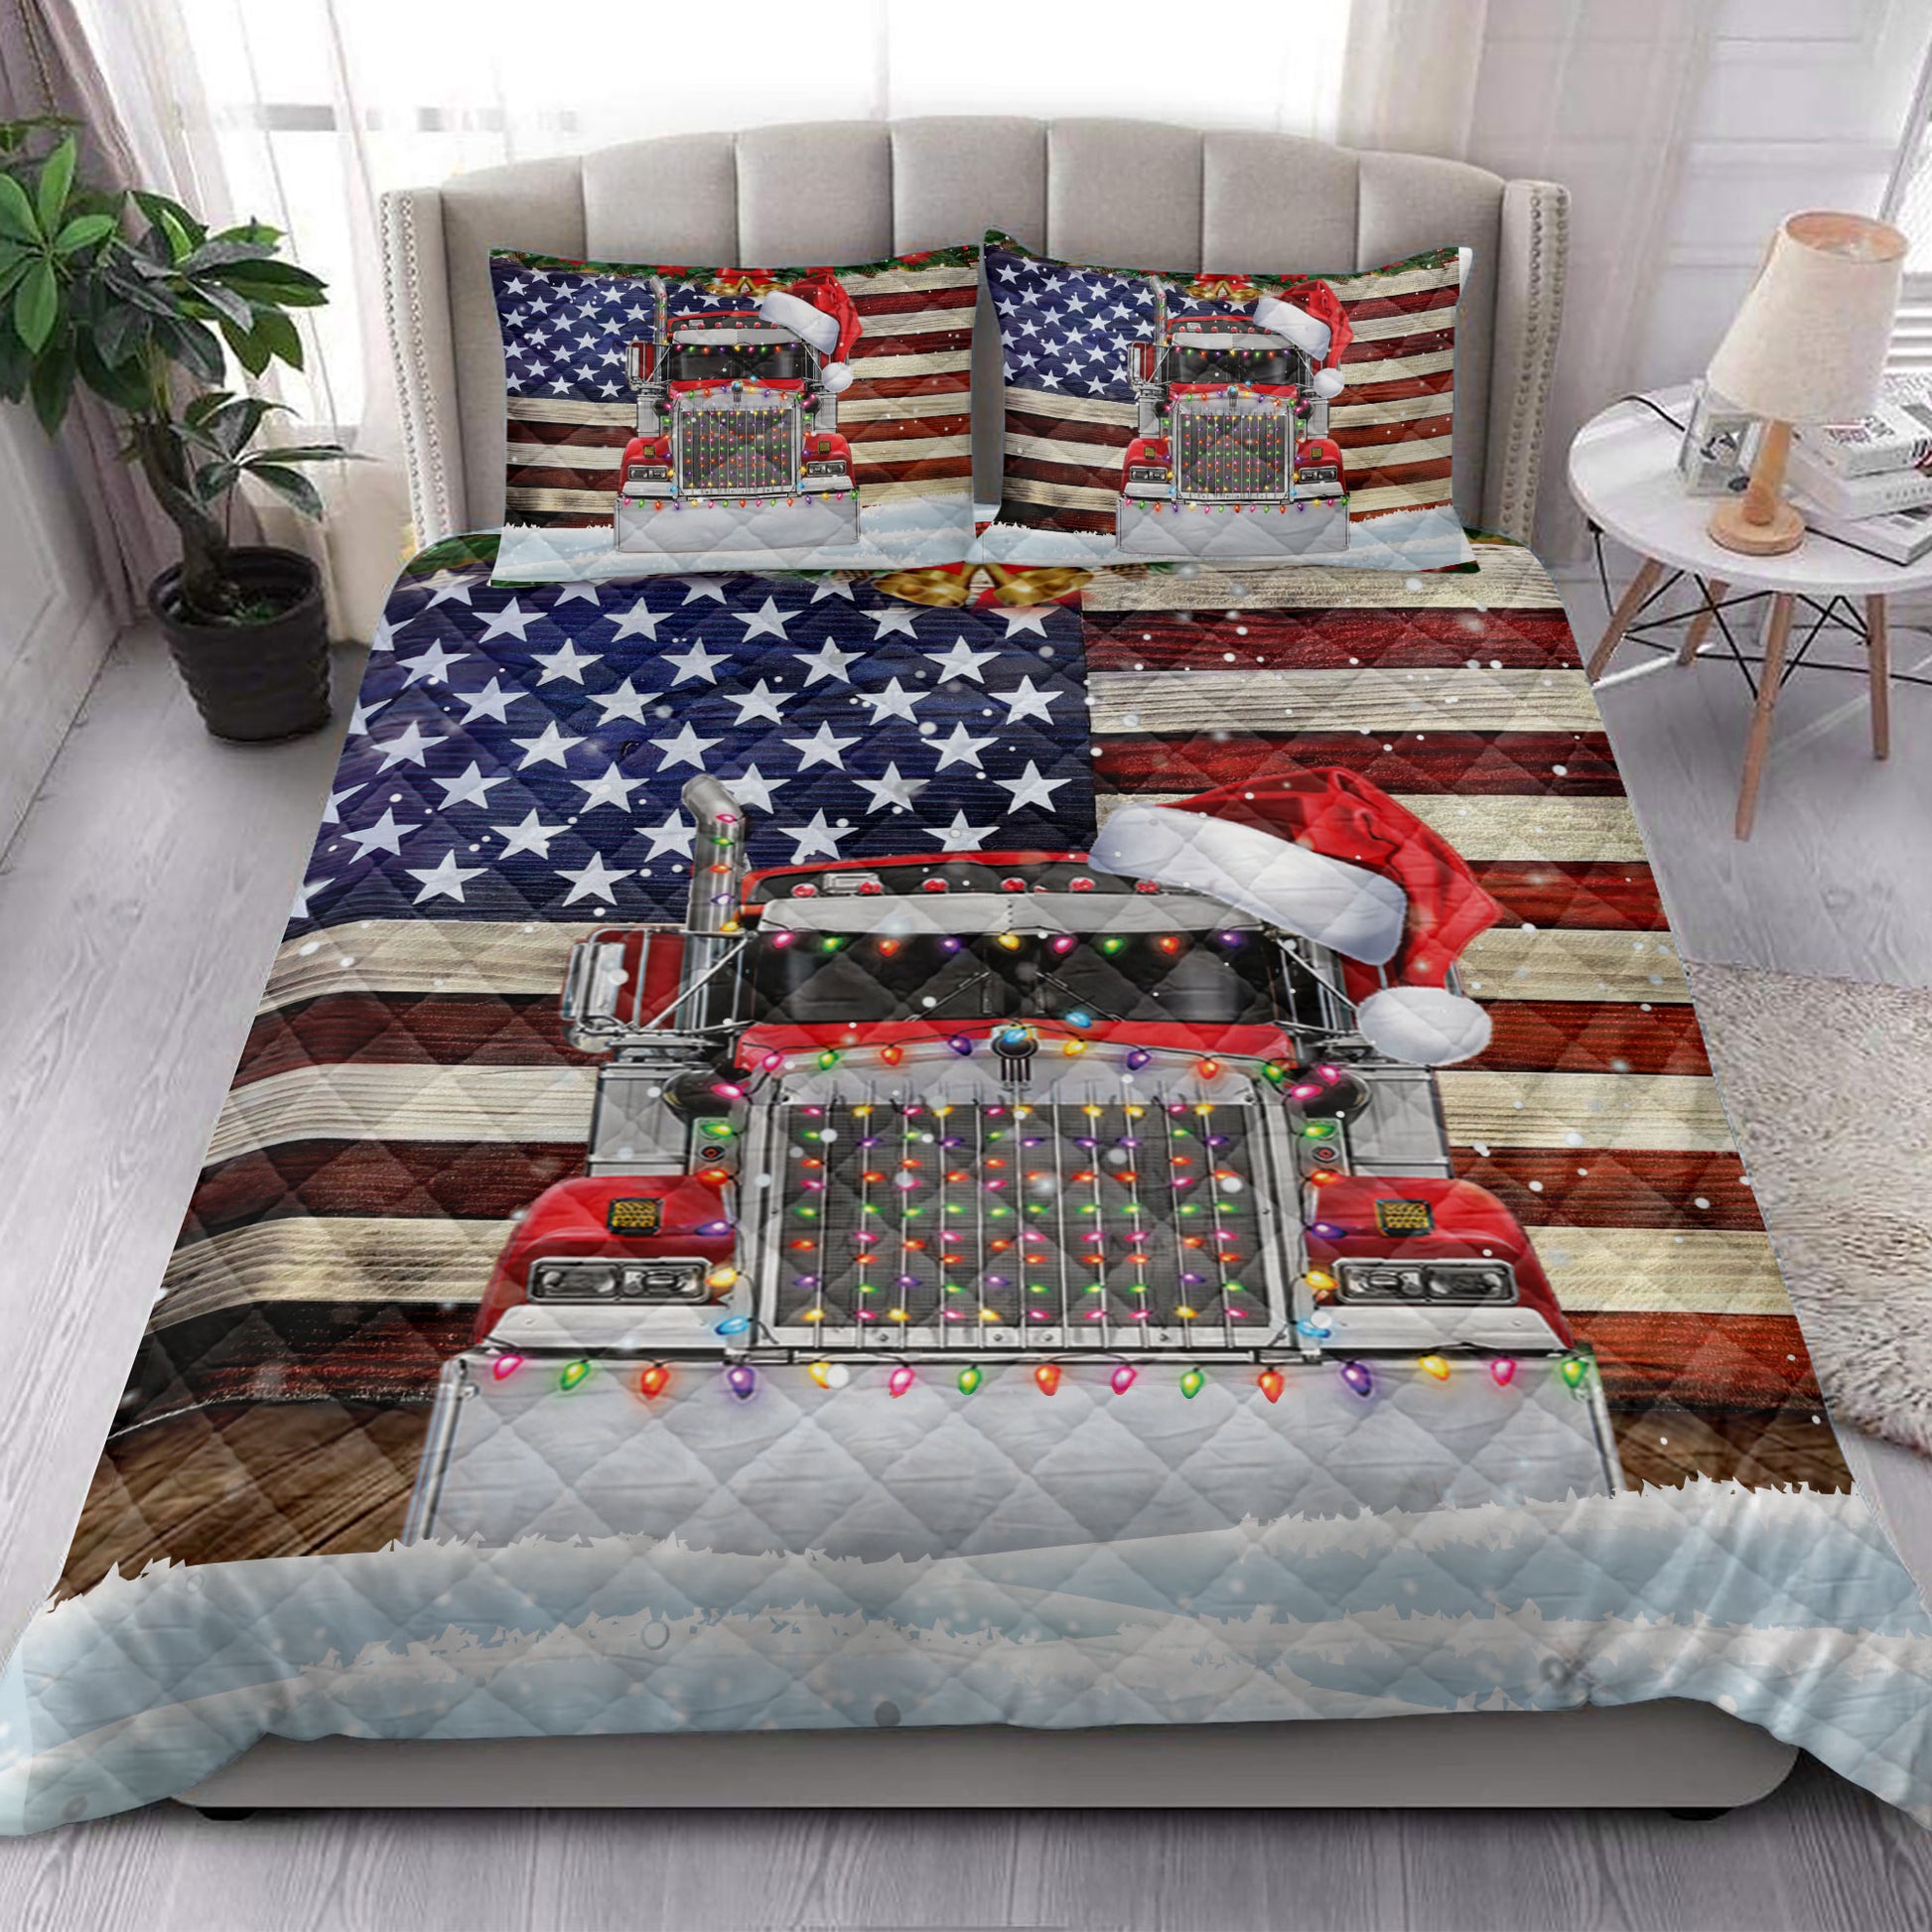 Ohaprints-Quilt-Bed-Set-Pillowcase-Red-Truck-Wearing-A-Christmas-Hat-With-String-Light-American-Flag-Blanket-Bedspread-Bedding-4120-King (90'' x 100'')